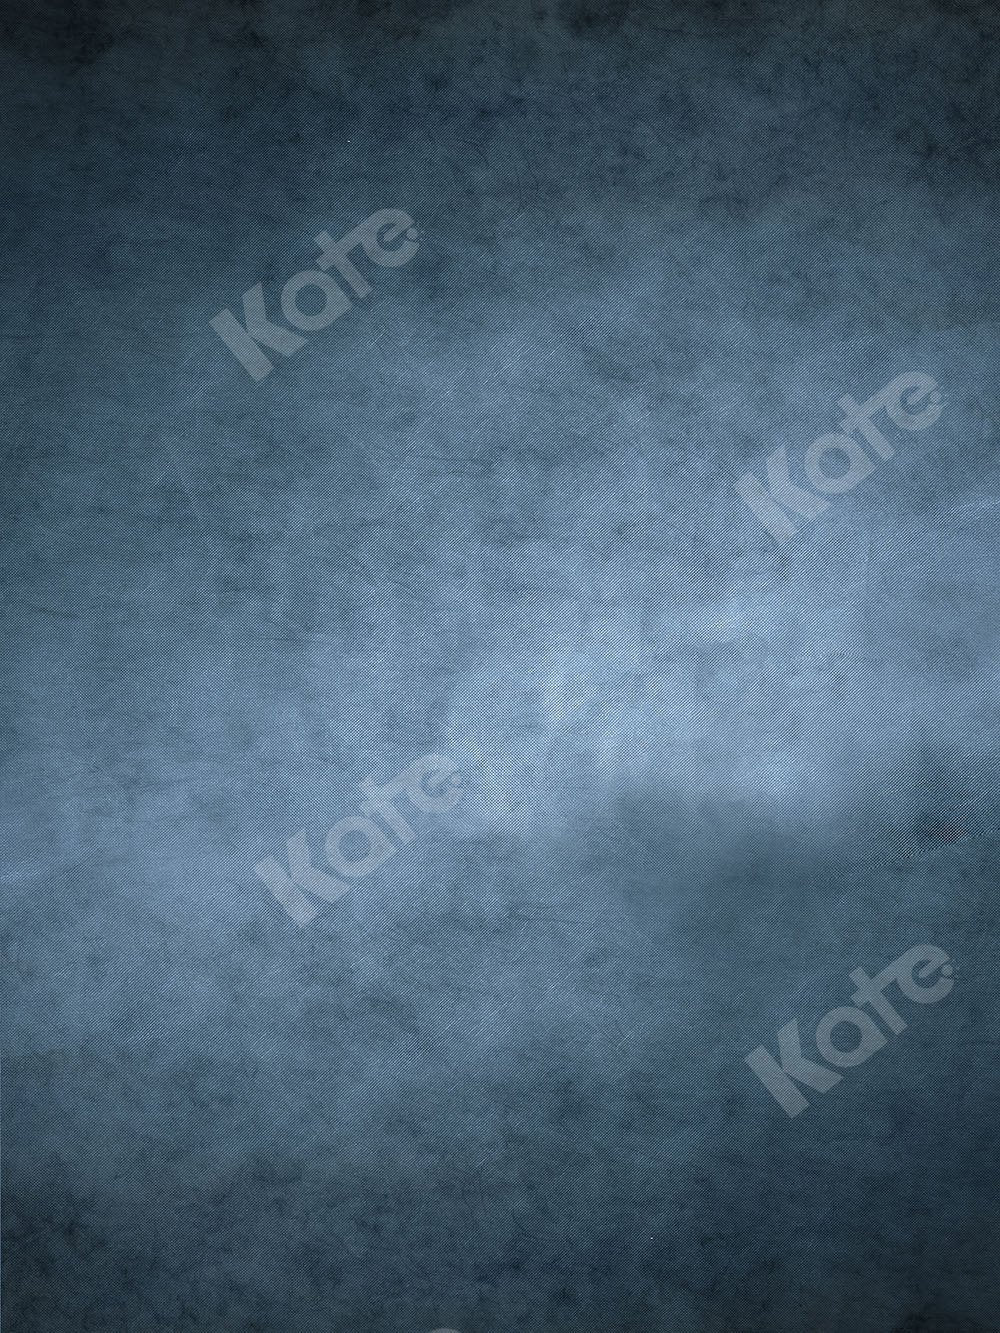 Kate Abstract Backdrop Texture Dark Blue Designed by Kate Image